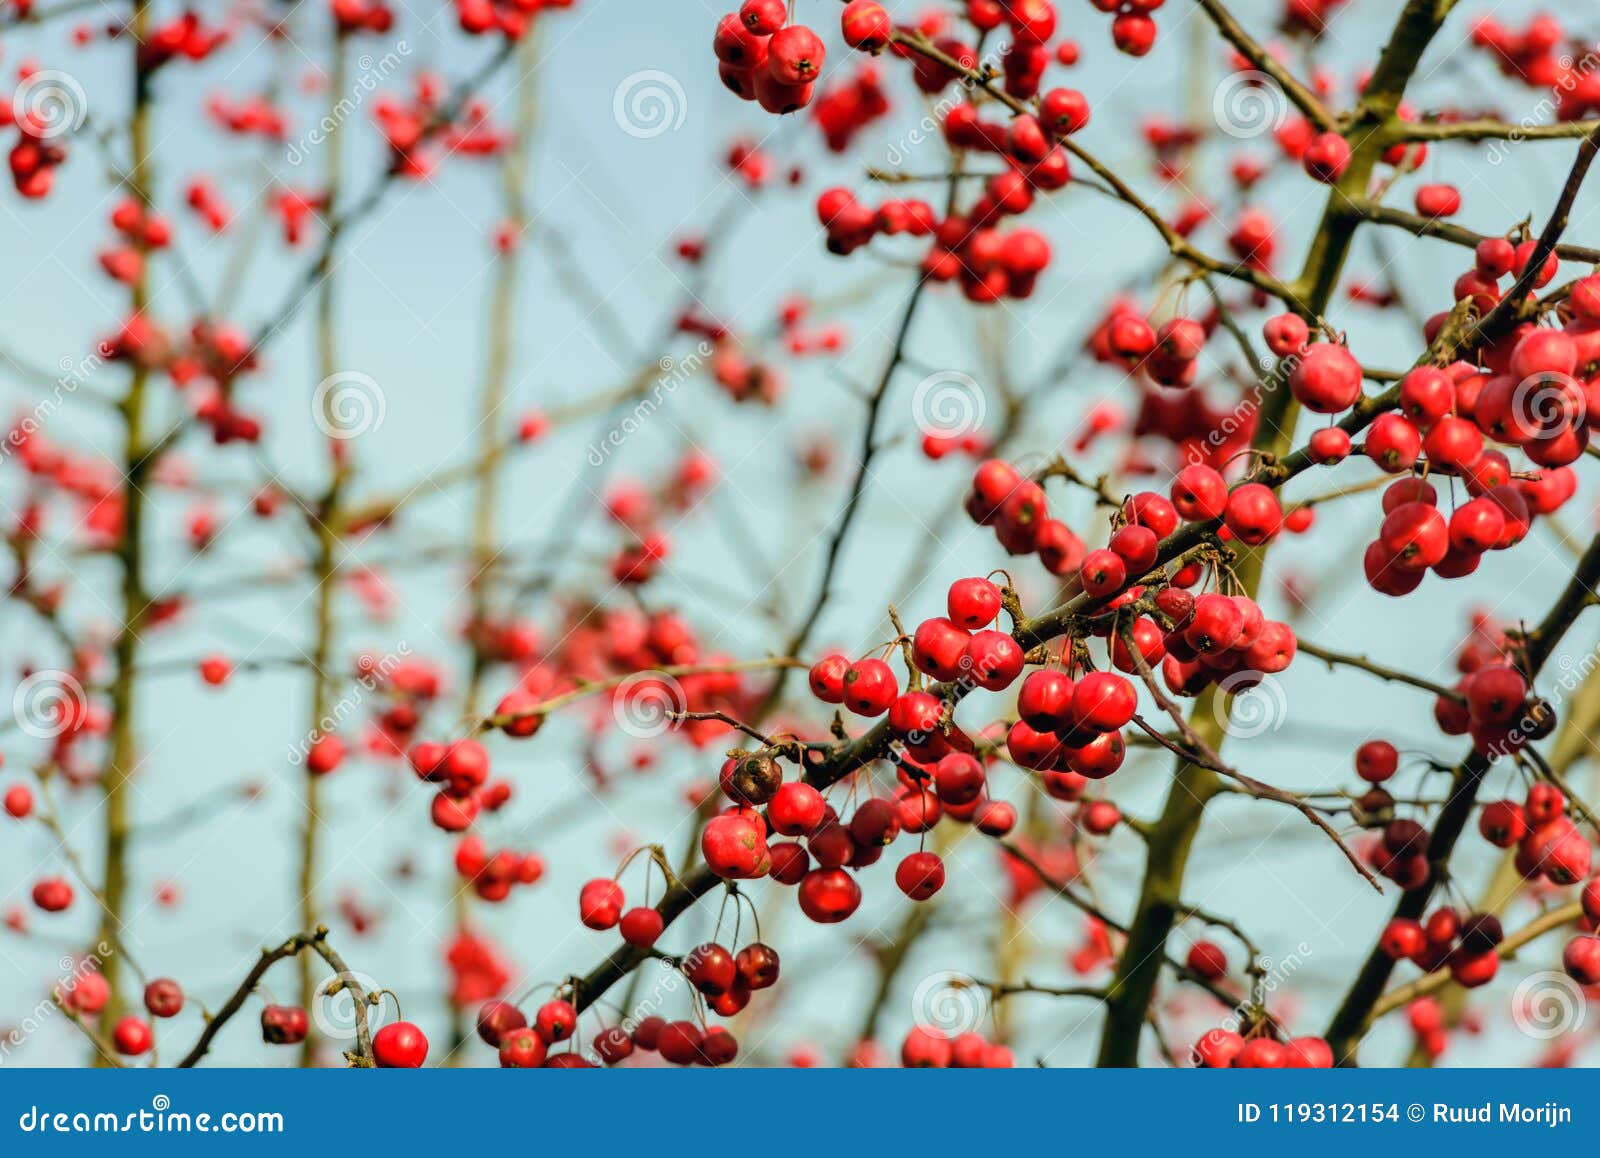 Bright Red Rowan Berries on Leafless Twigs Stock Photo - Image of ...